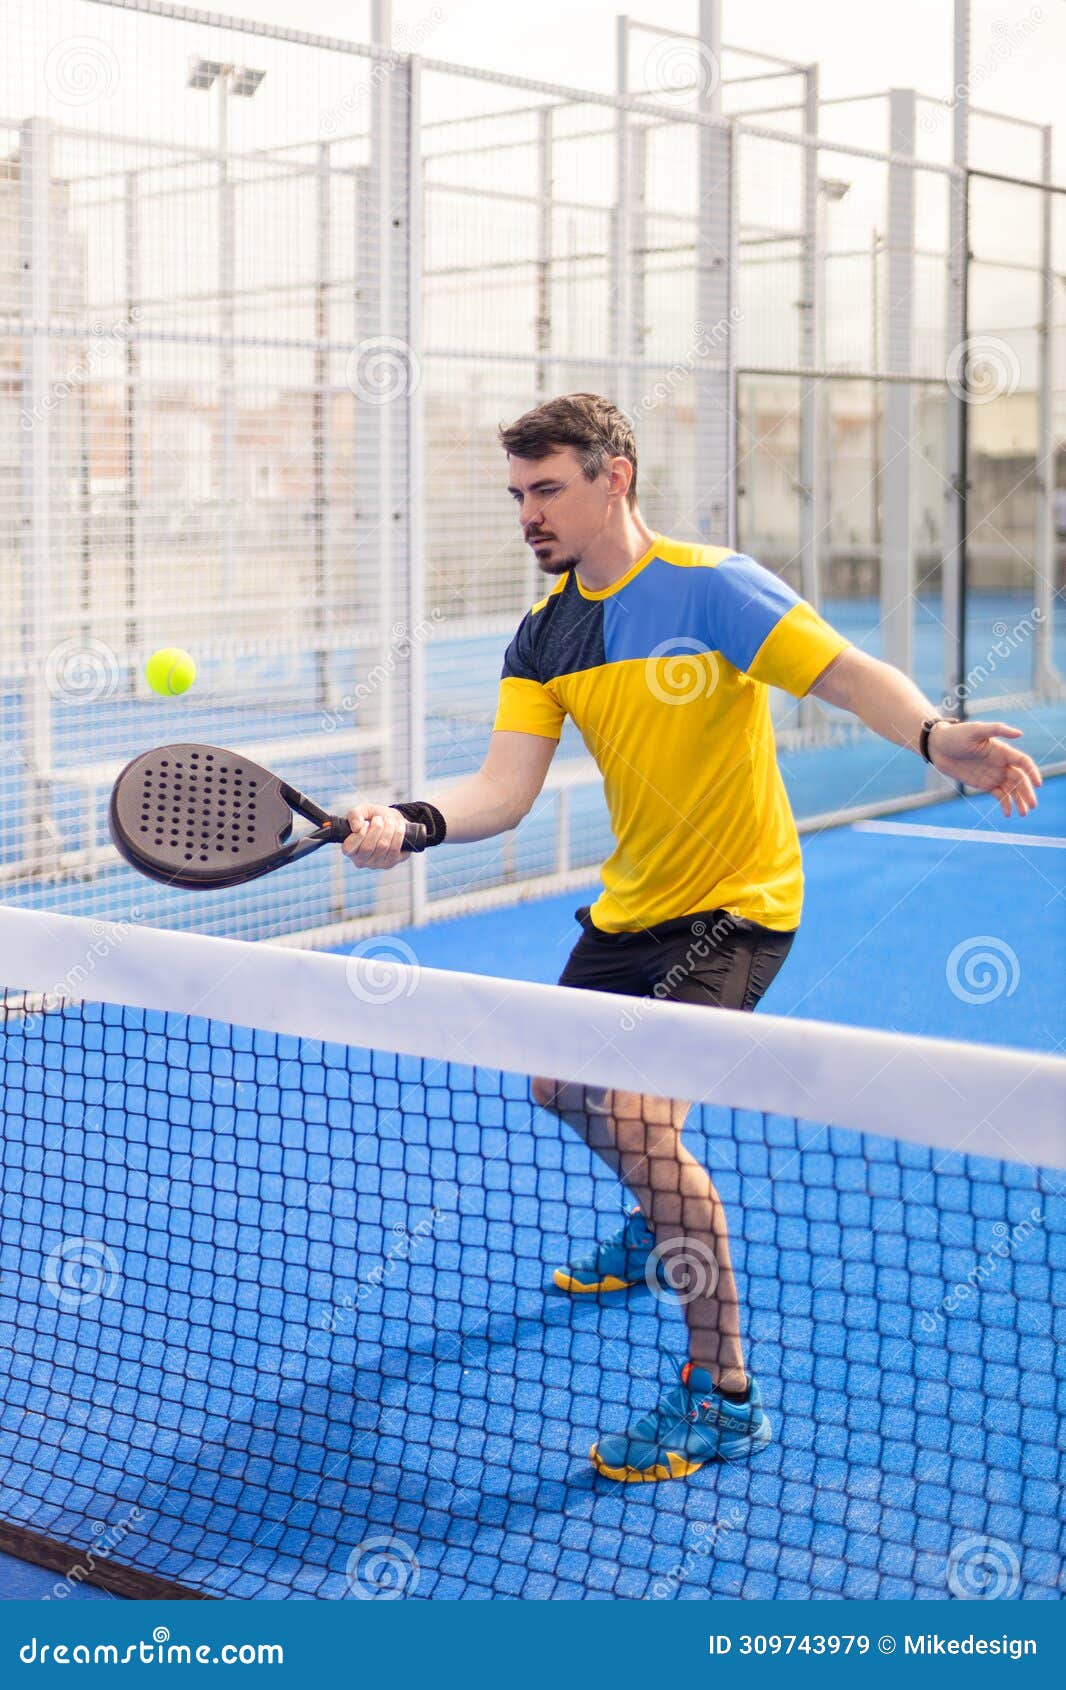 open tour template. padel tennis player on the blue court background outdoors. paddle tenis template for bookmaker